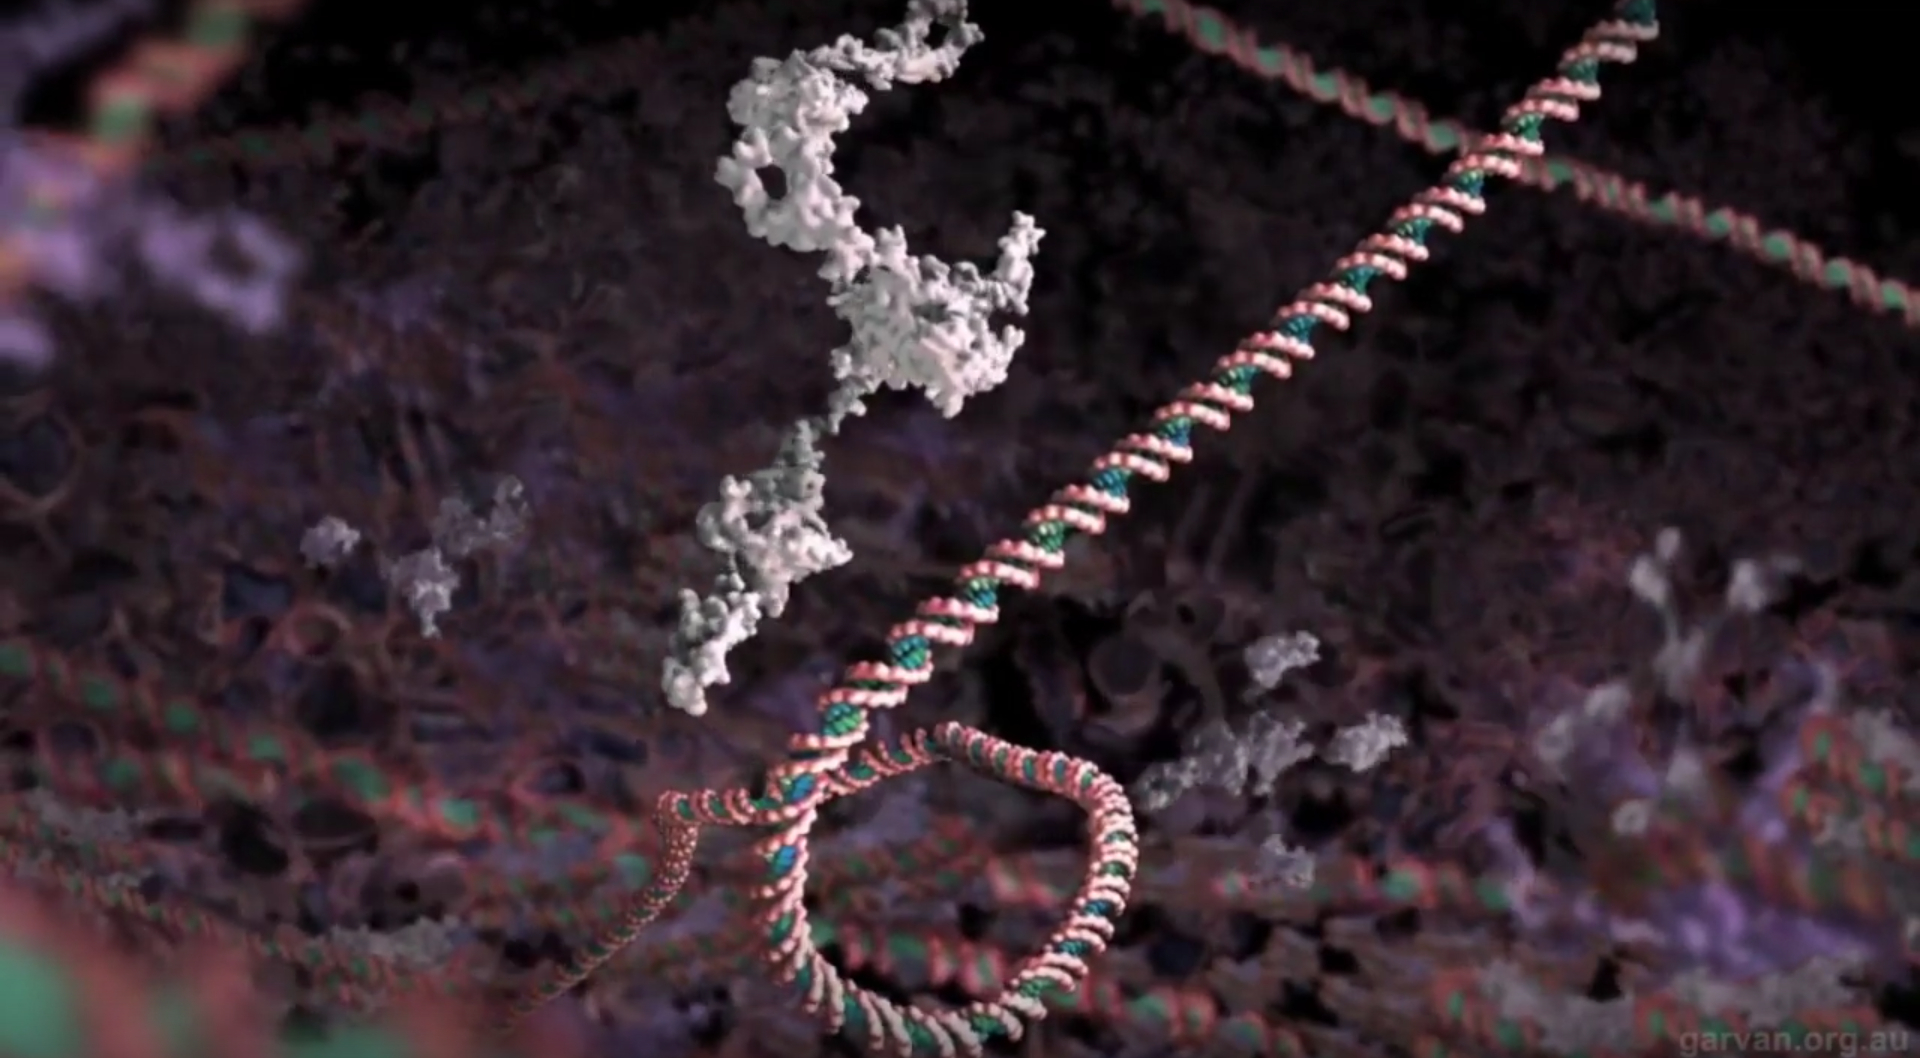 The P53 protein repairing damaging mutations in DNA.